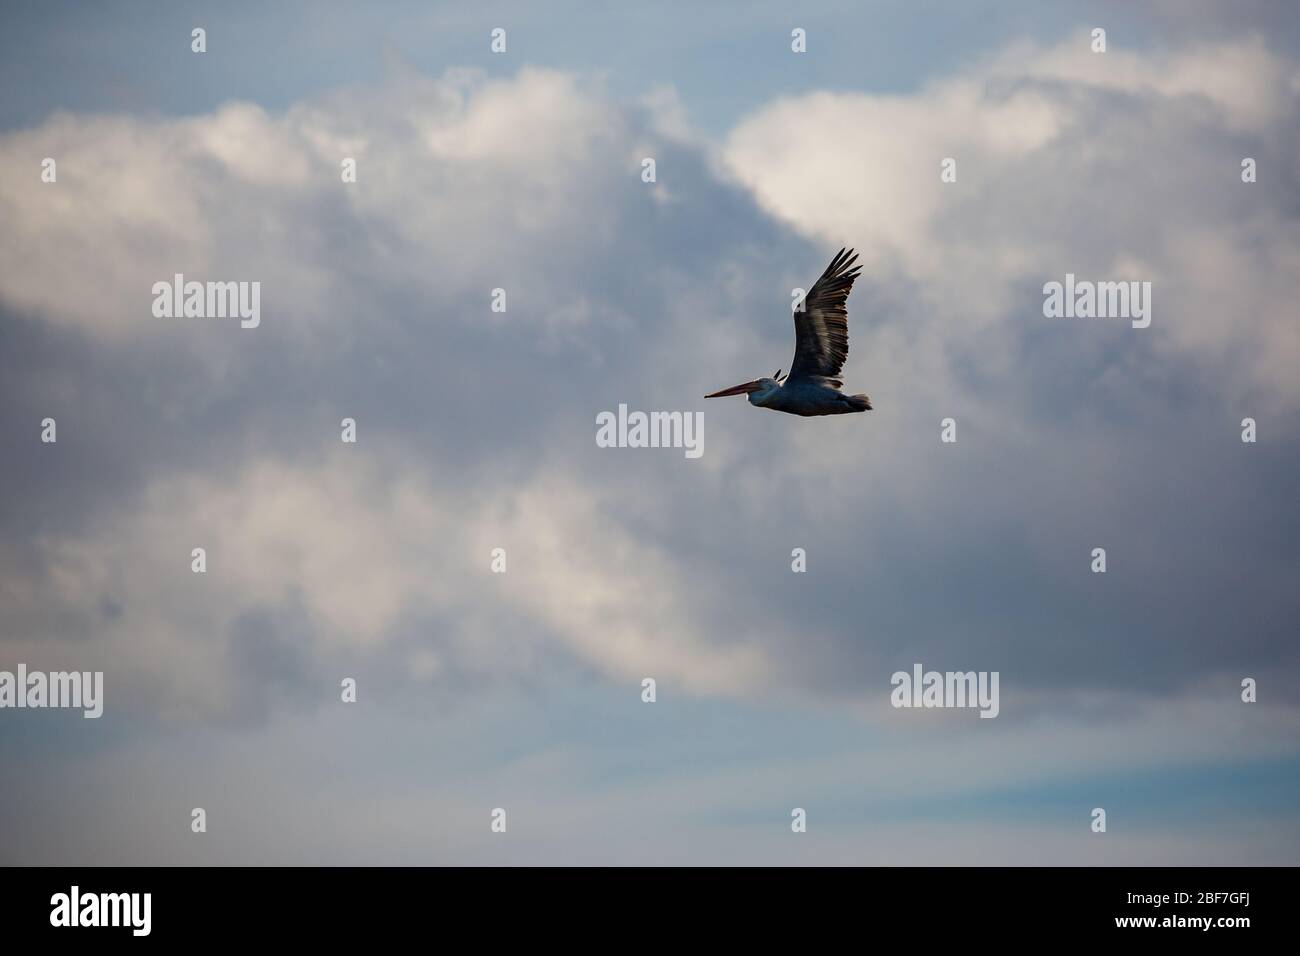 Amazingly beautiful big Dalmatian single pelican flying with big span of wings. Cloudy winter blue sky over Porto Lagos, Northern Greece. Picturesque frozen moment of Nature Stock Photo